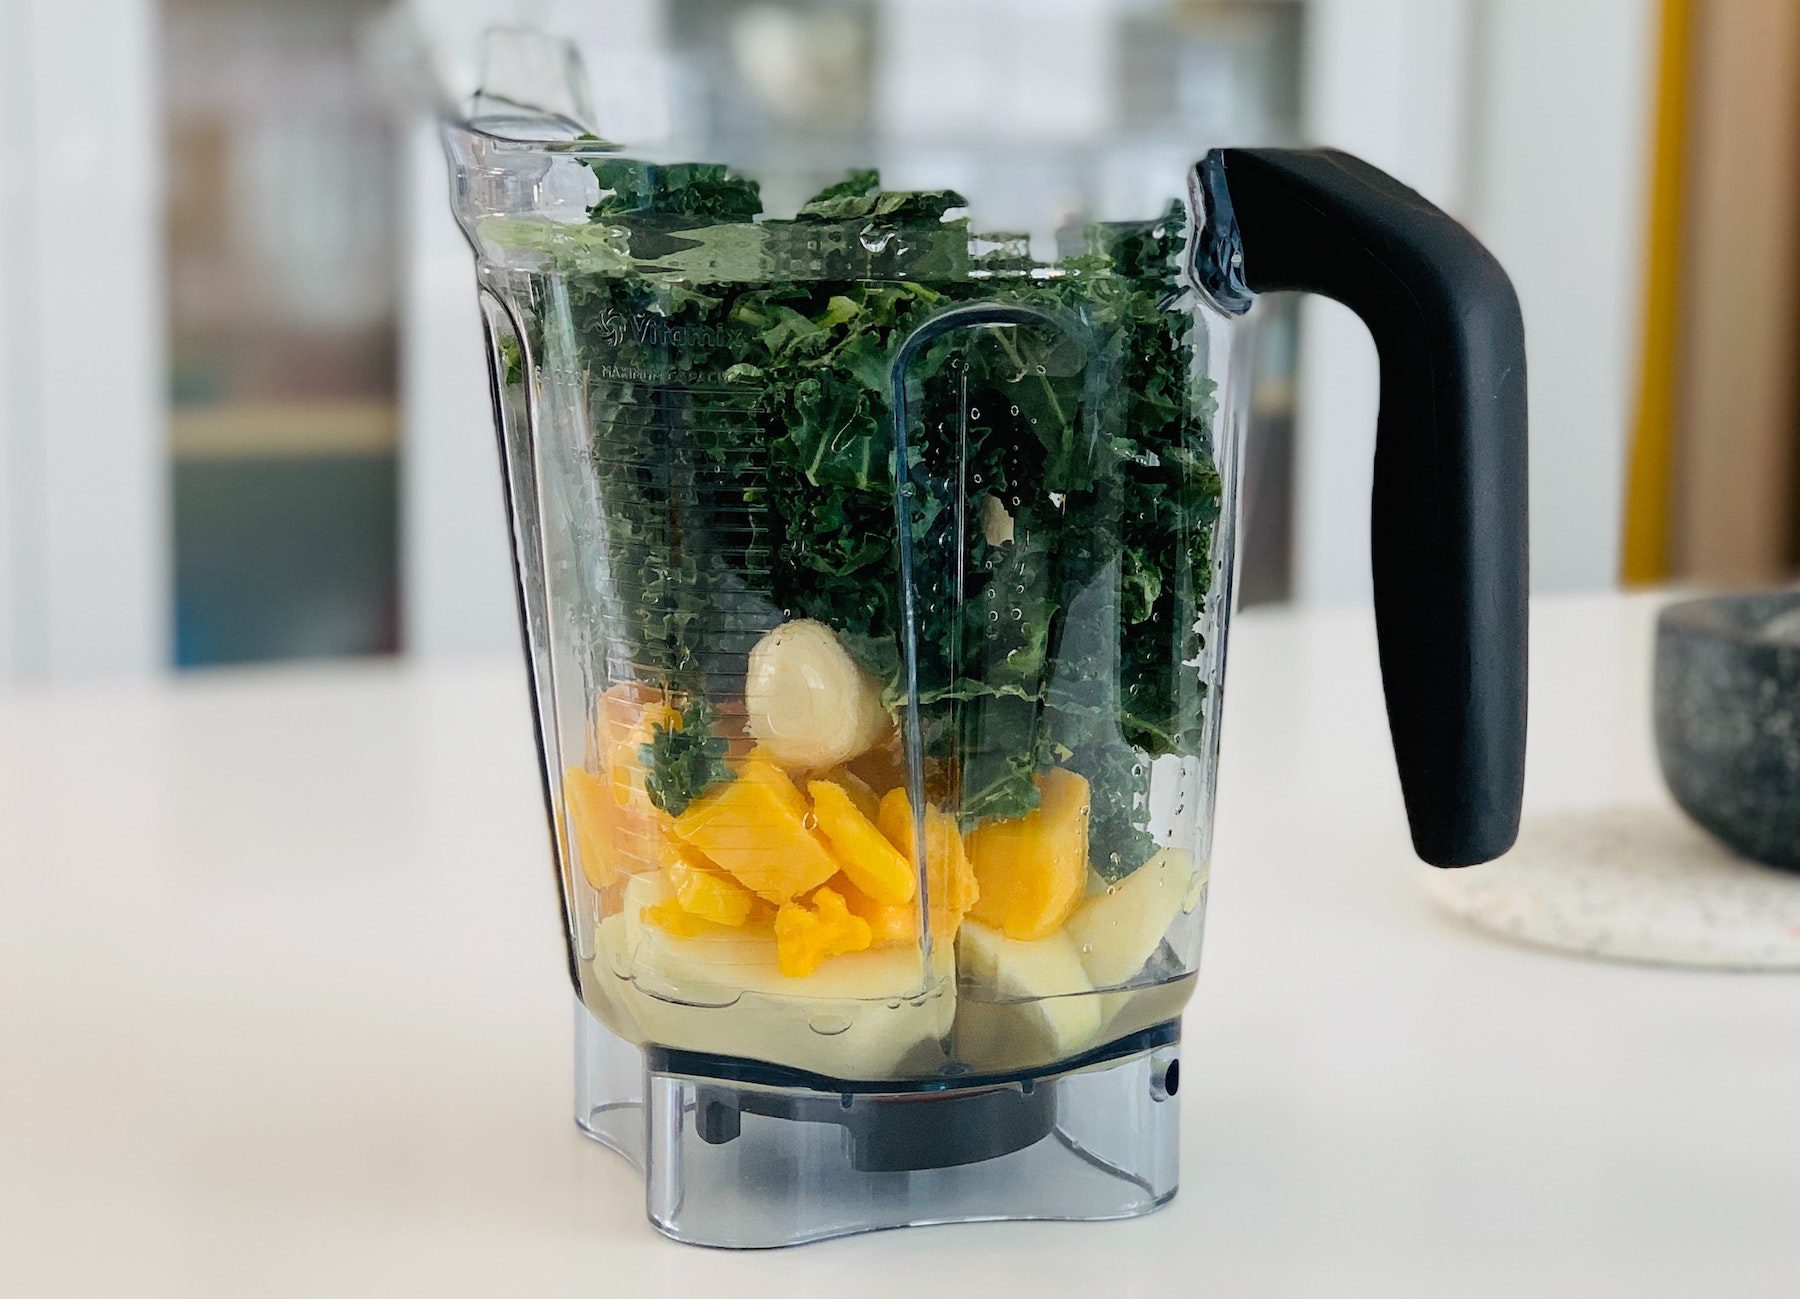 Ingredients for a smoothie recipe piled into a blender pitcher, including mango, banana, and kale.